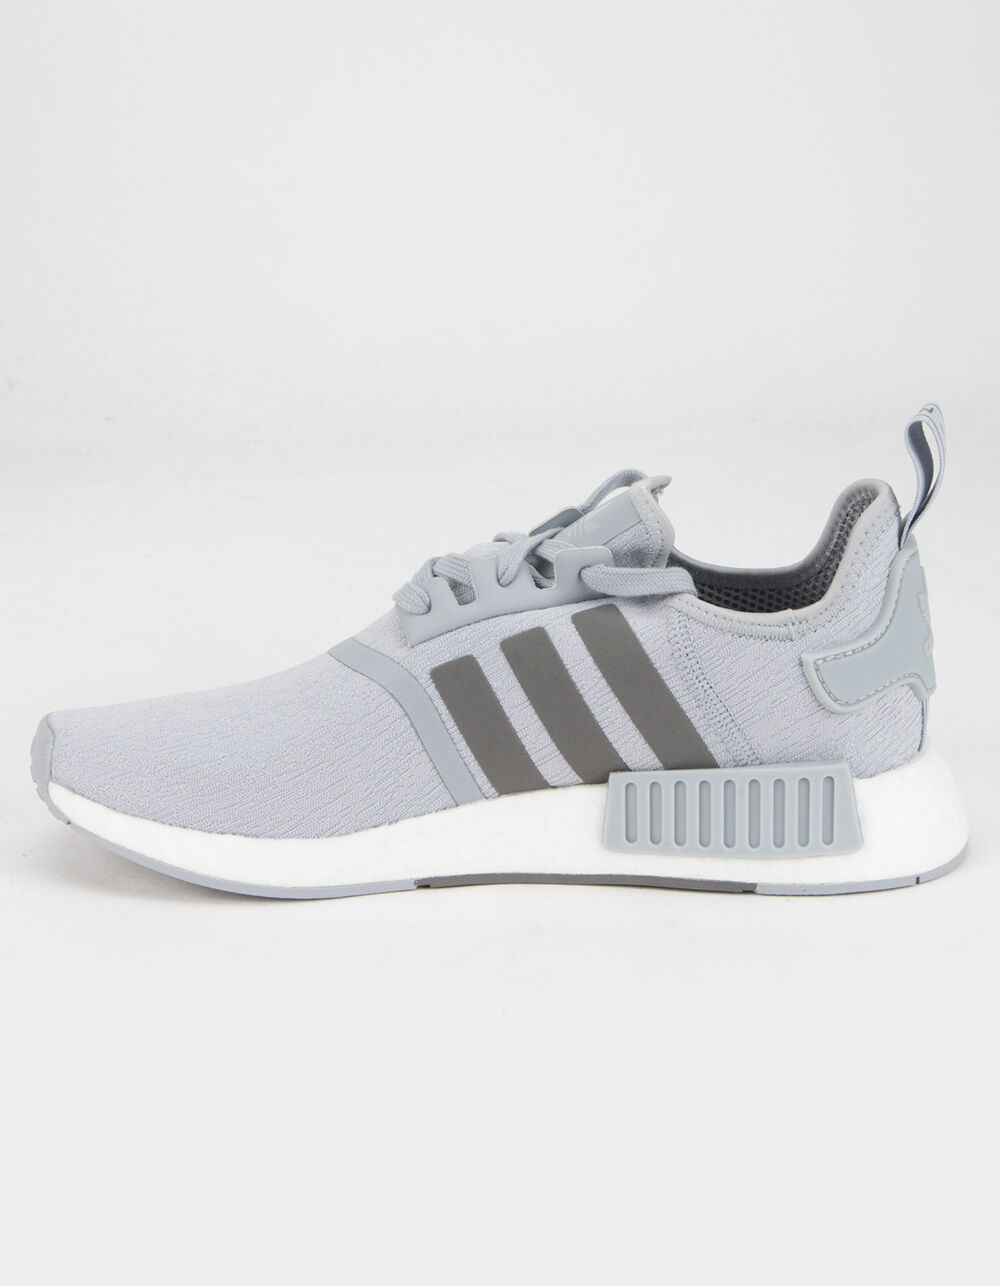 ADIDAS NMD_R1 Silver Shoes - SILVER/ORANGE | Tillys